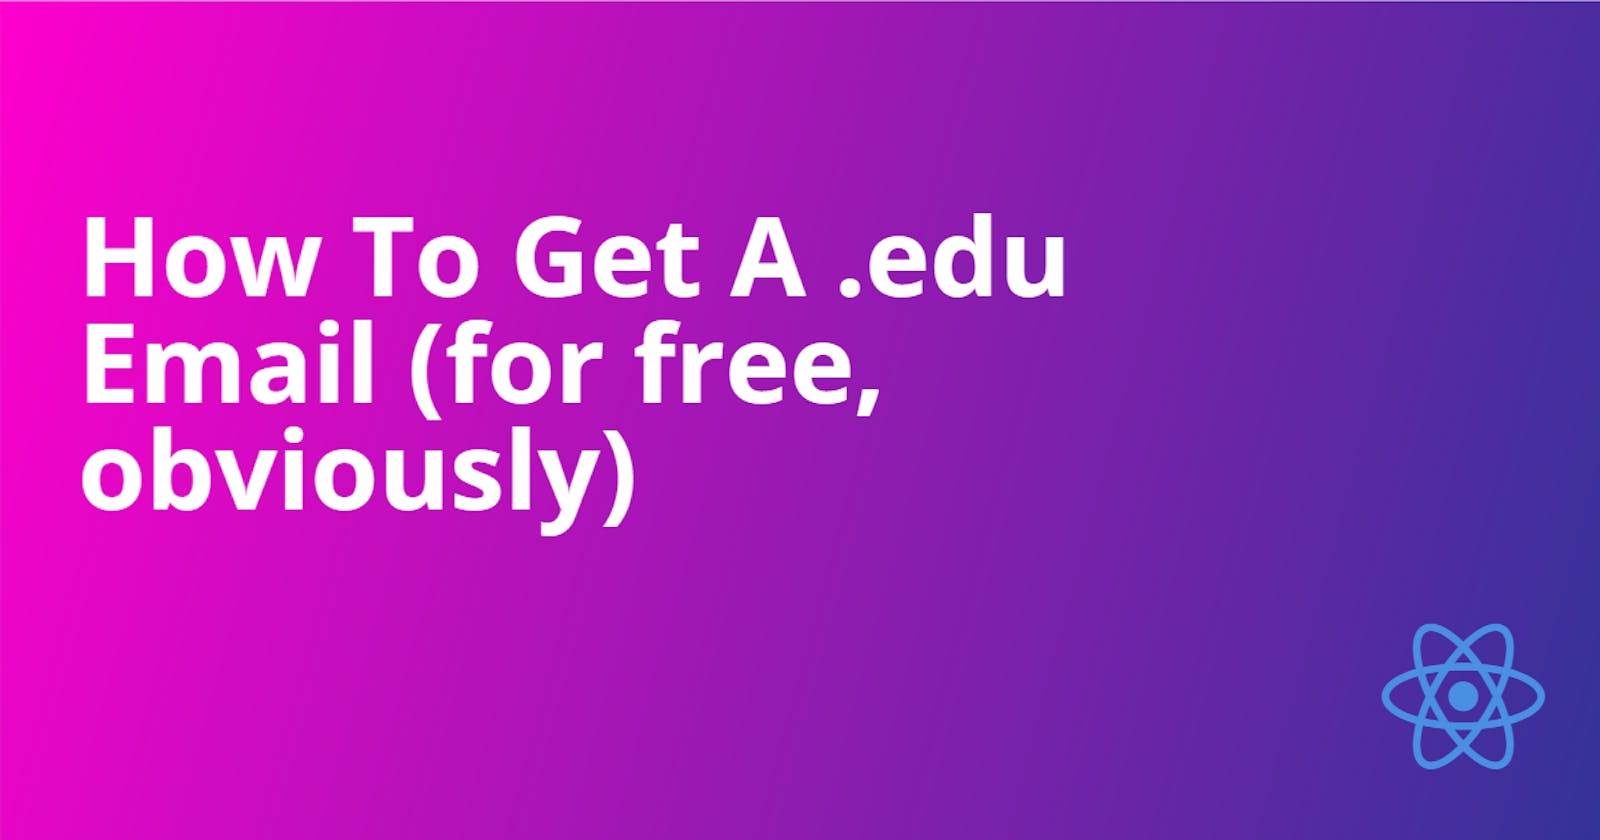 How To Get A .edu Email (for free, obviously)